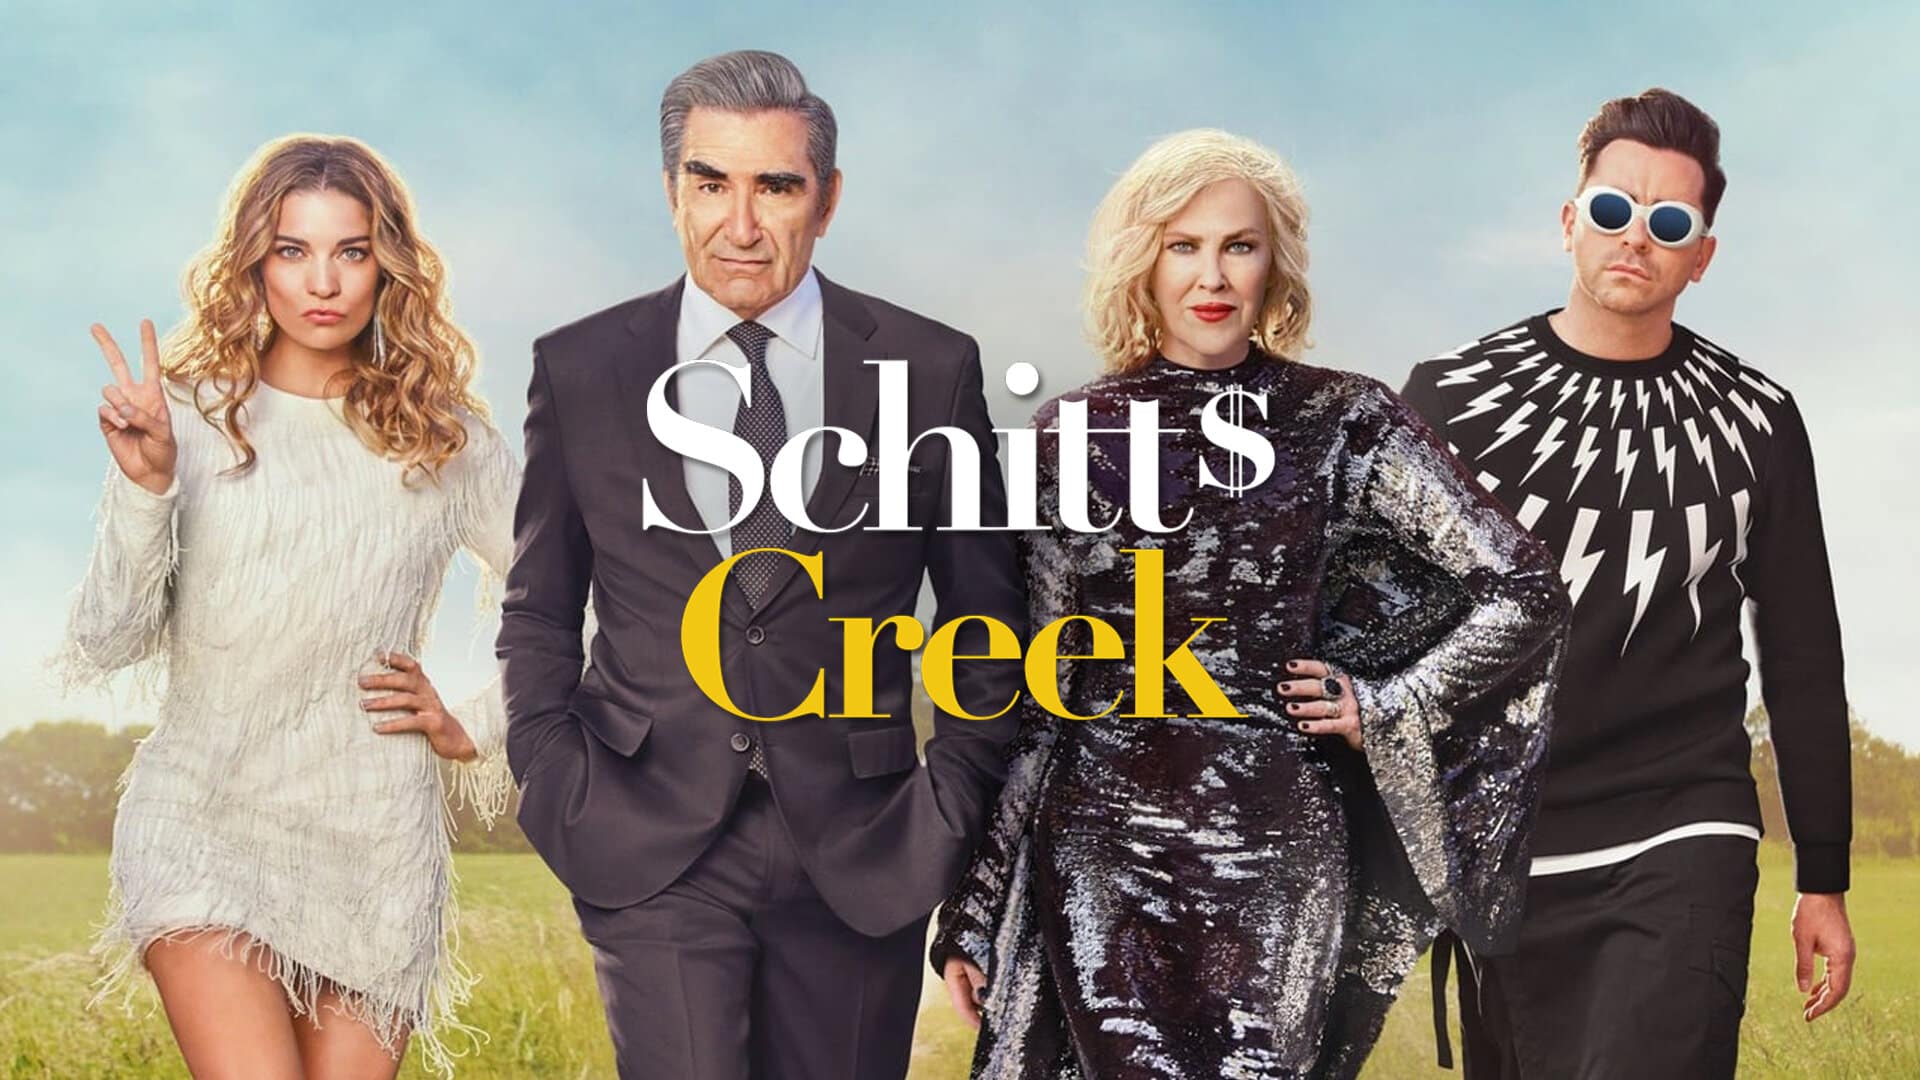 Schitt's Creek' season 5: All the best quotes to live your life